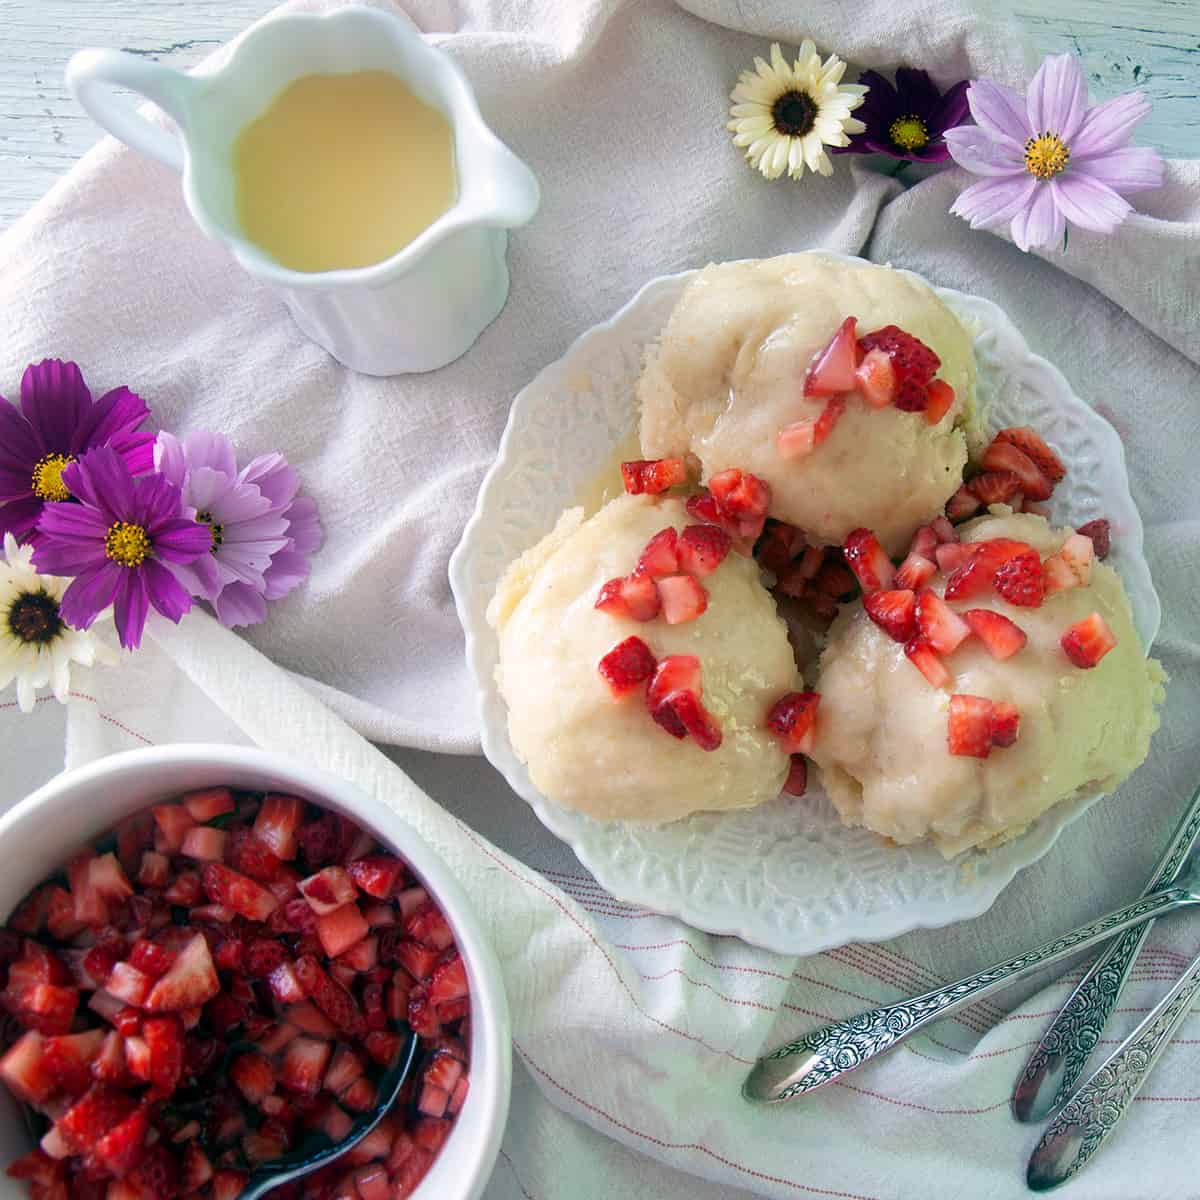 Three dampfnudel with strawberries on top.